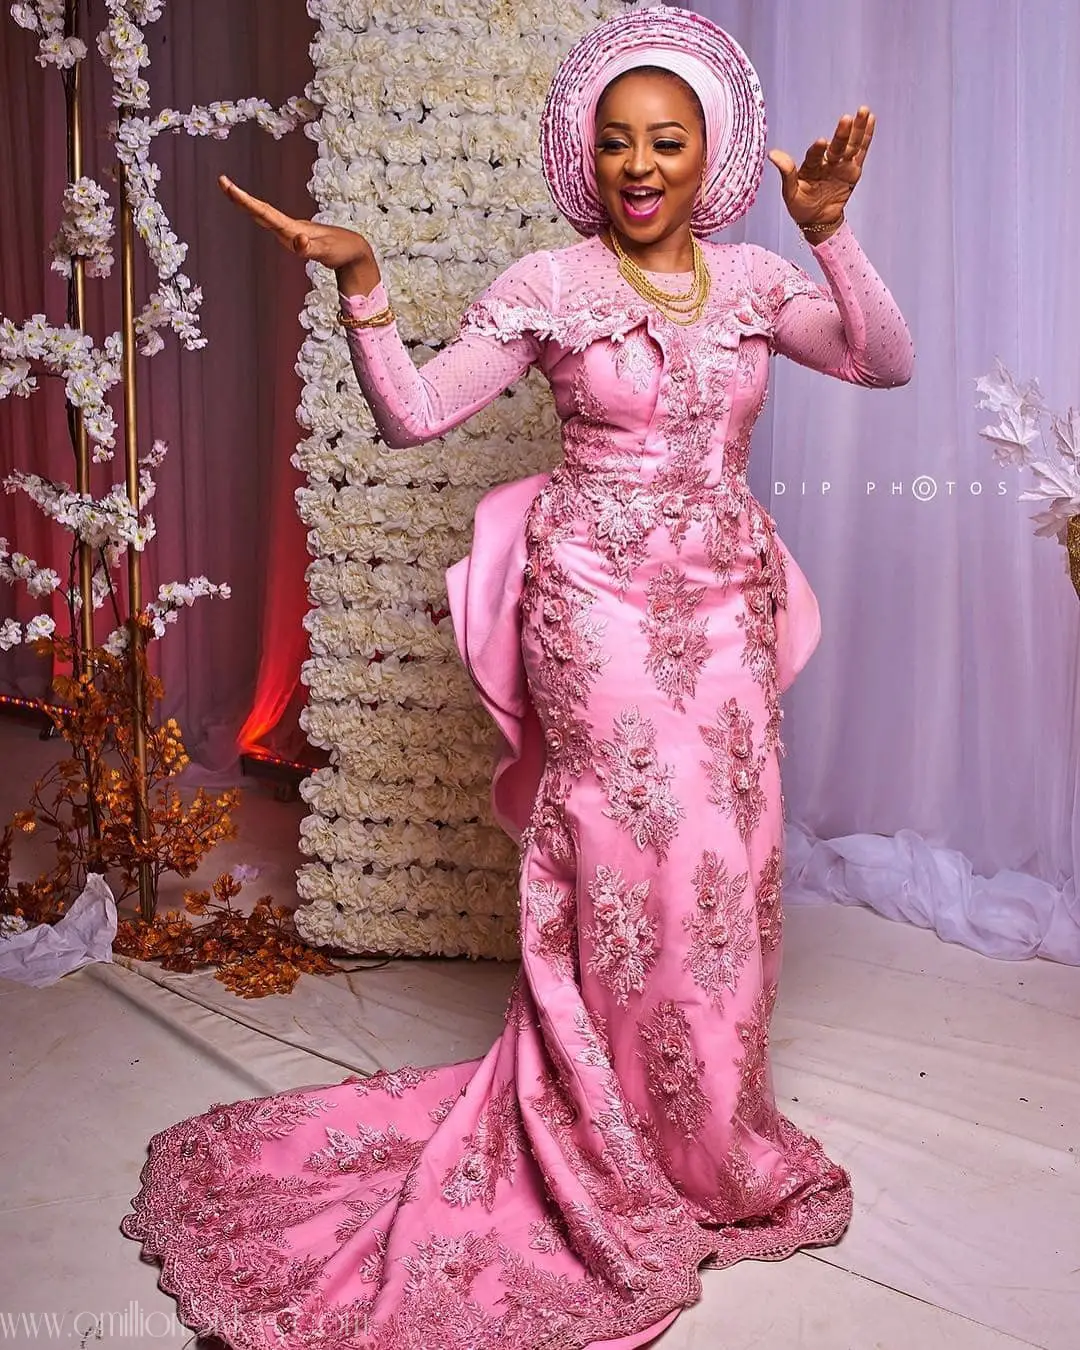 Our Hausa Brides Look Breath-taking!